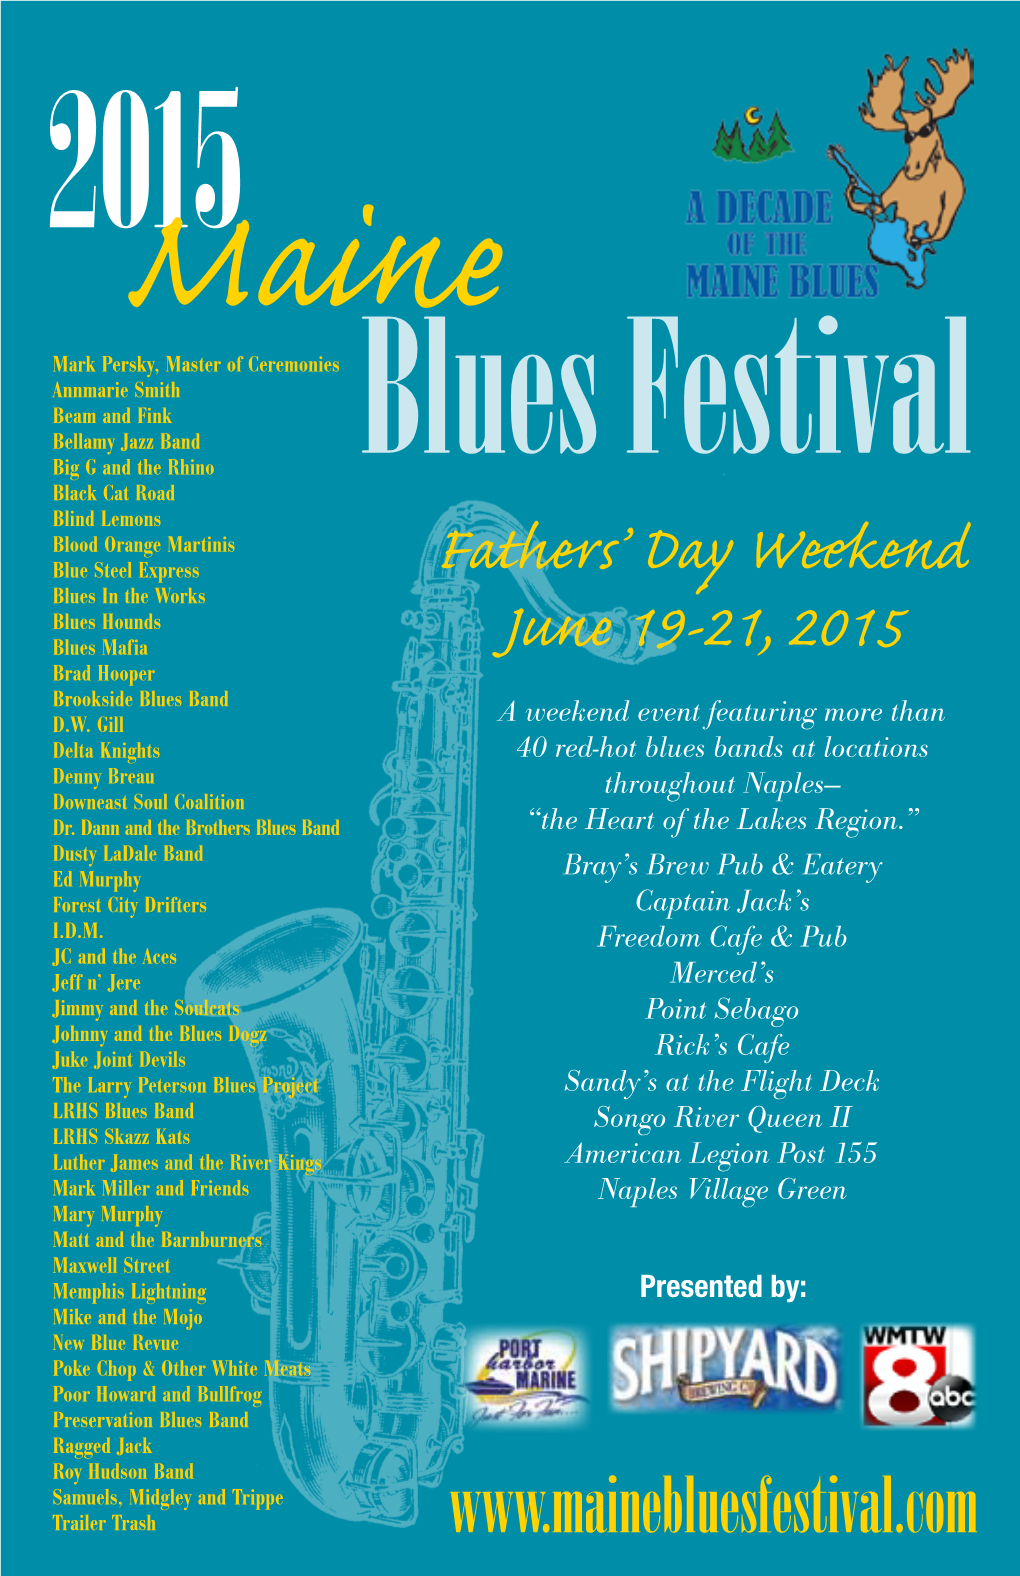 Fathers' Day Weekend June 19-21, 2015